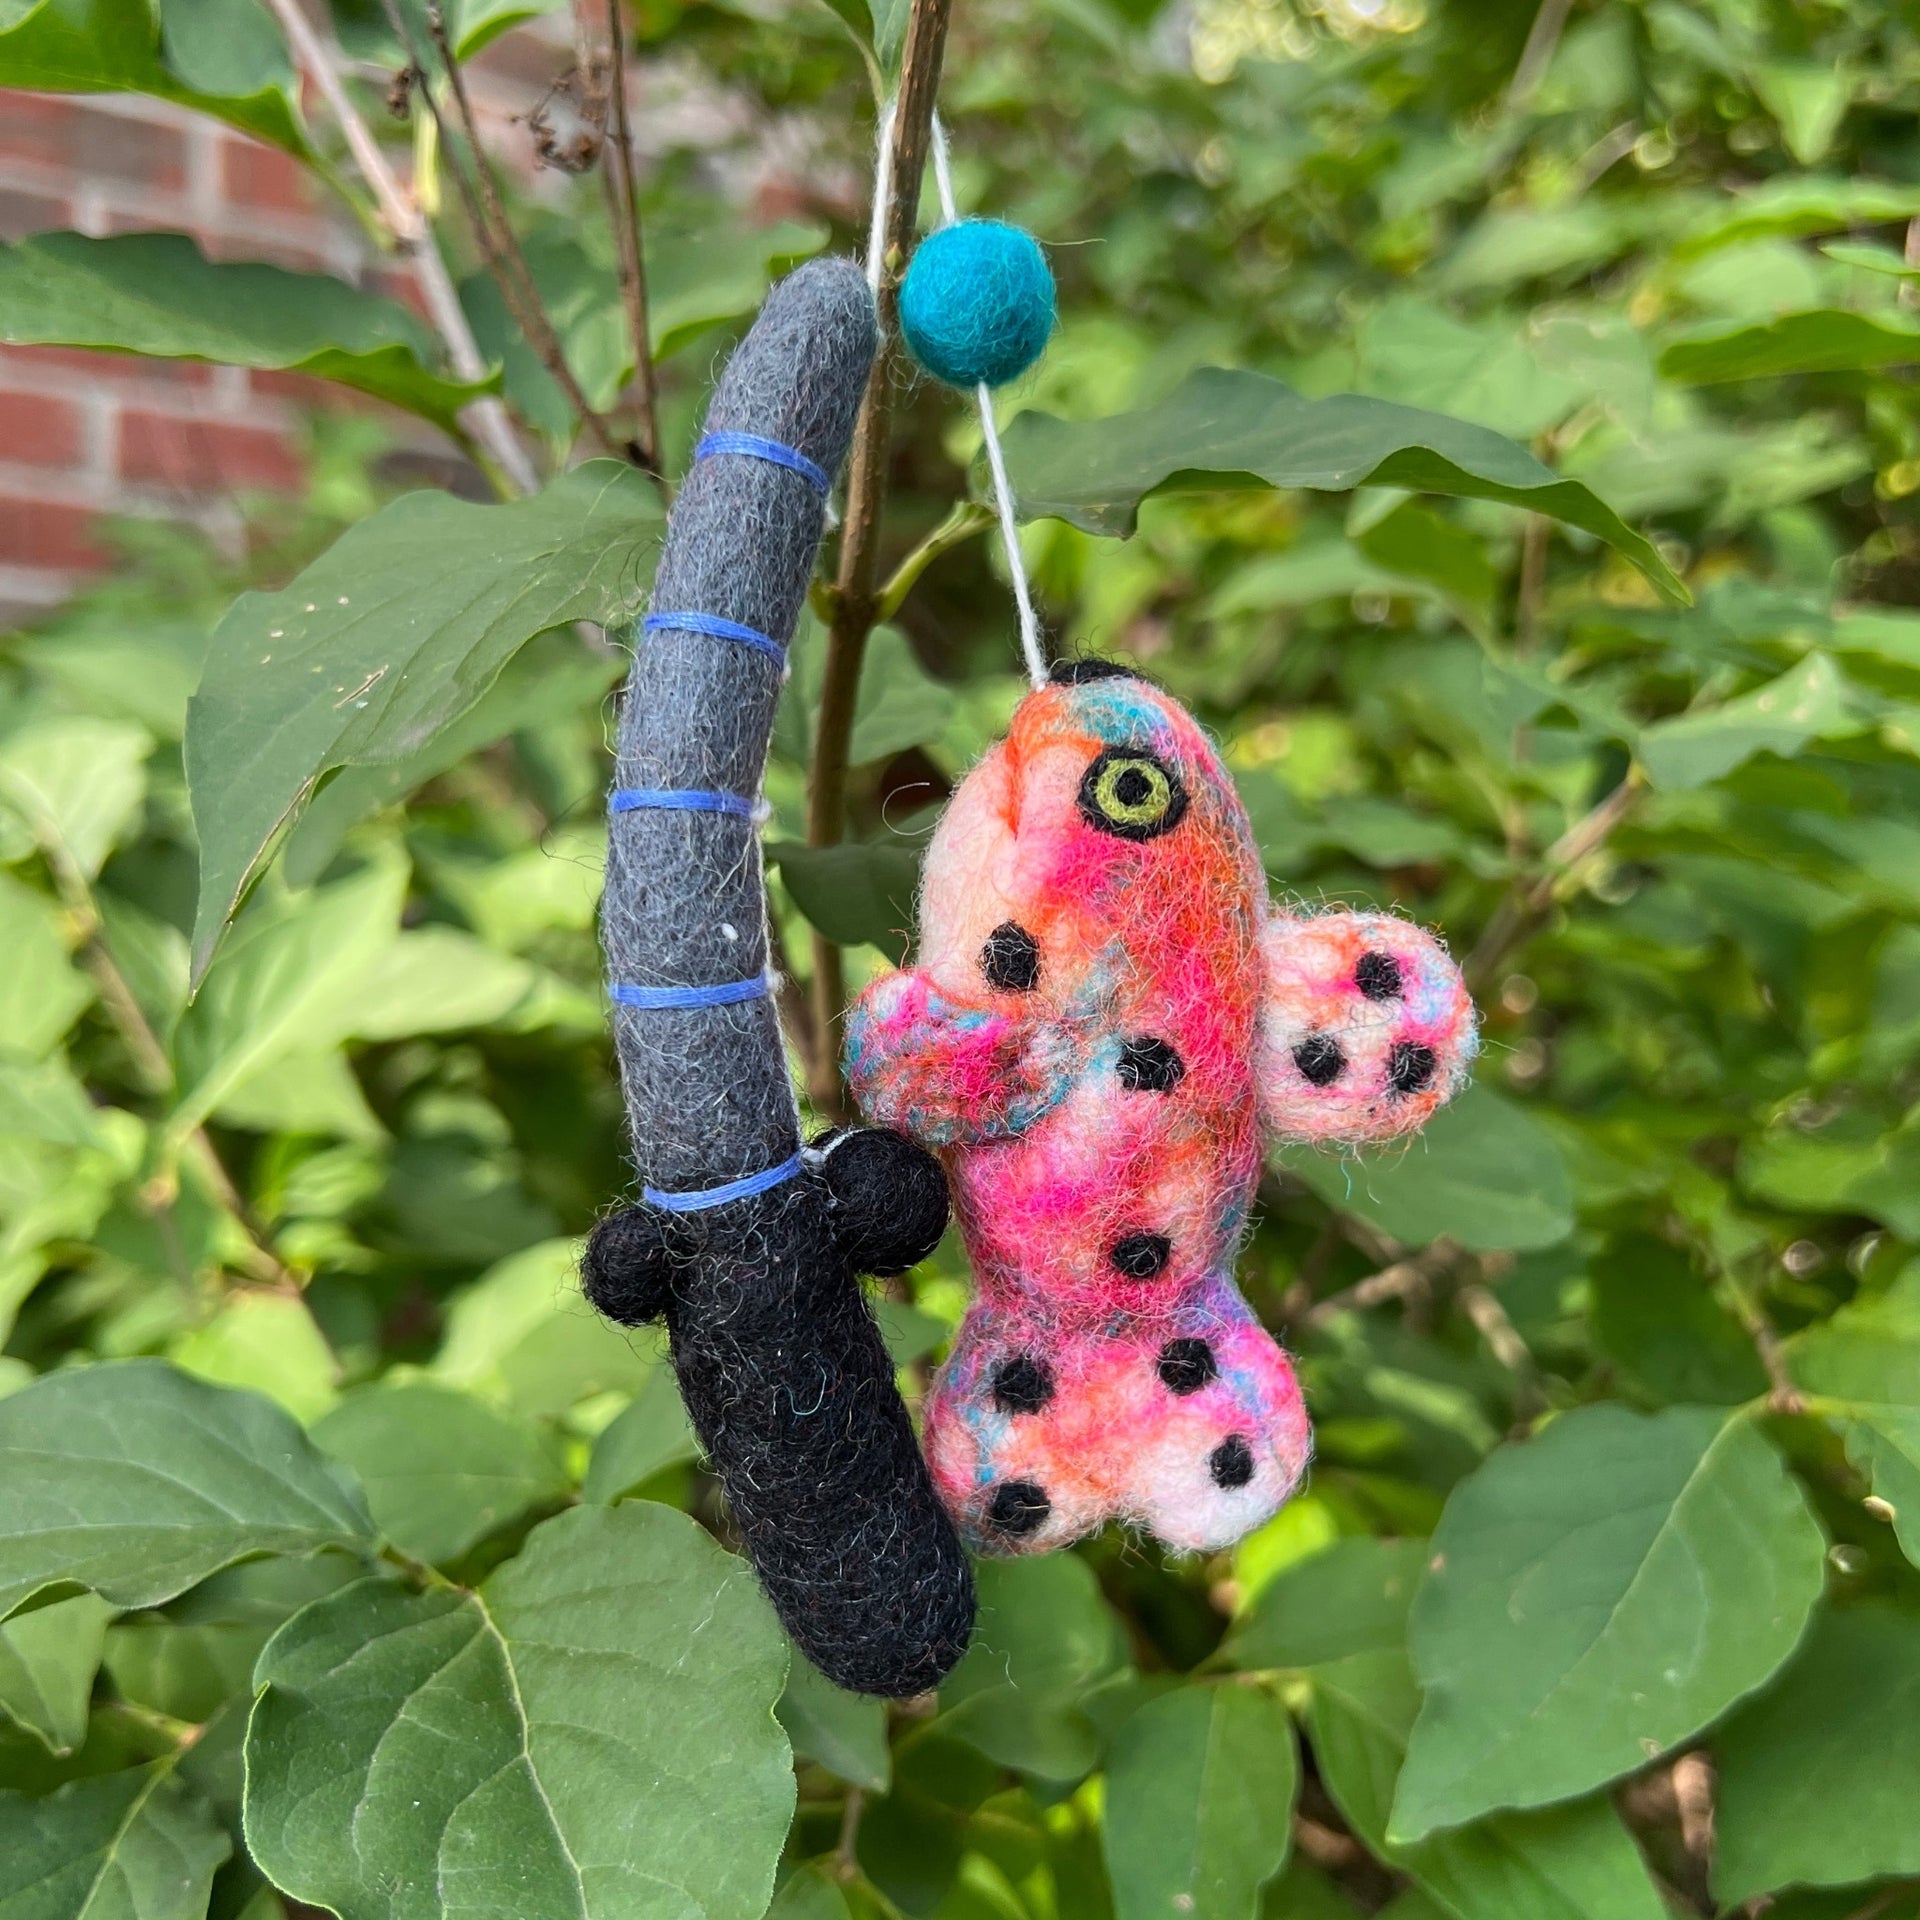 rainbow trout caught on a fishing pole ornament